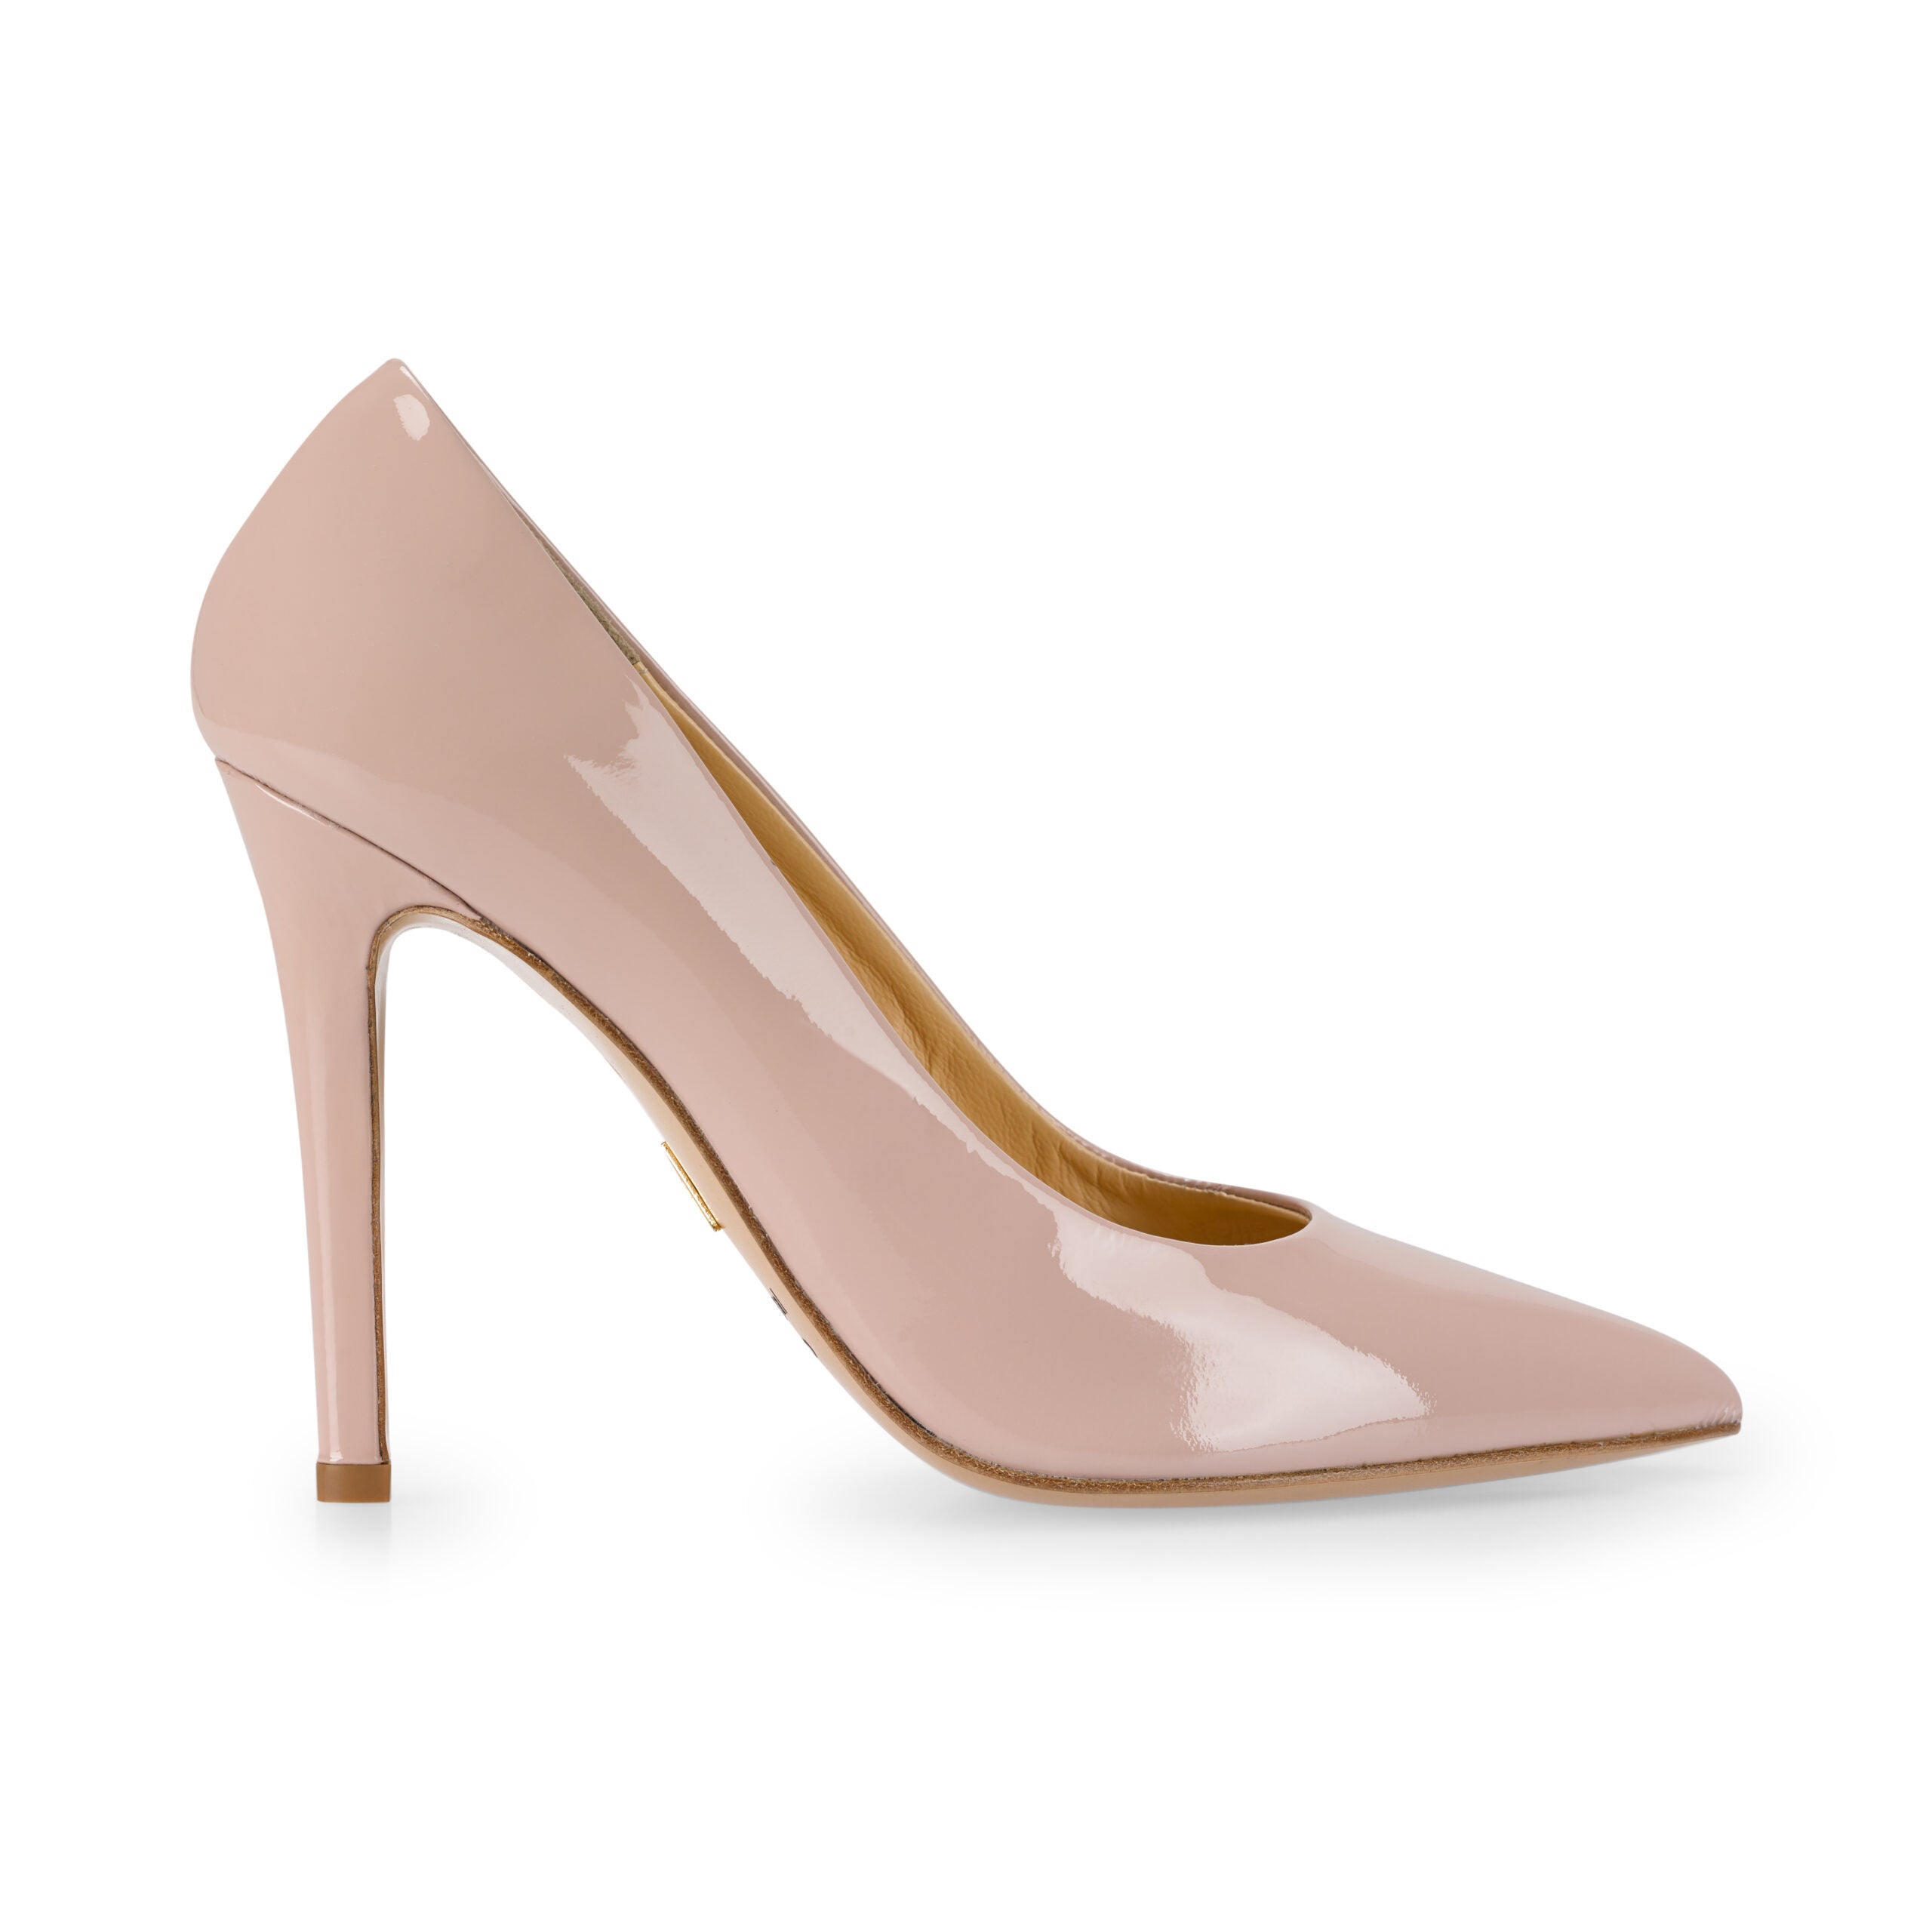 The brigitte pump 90 is the ultimate barely-there heels your closet needs.